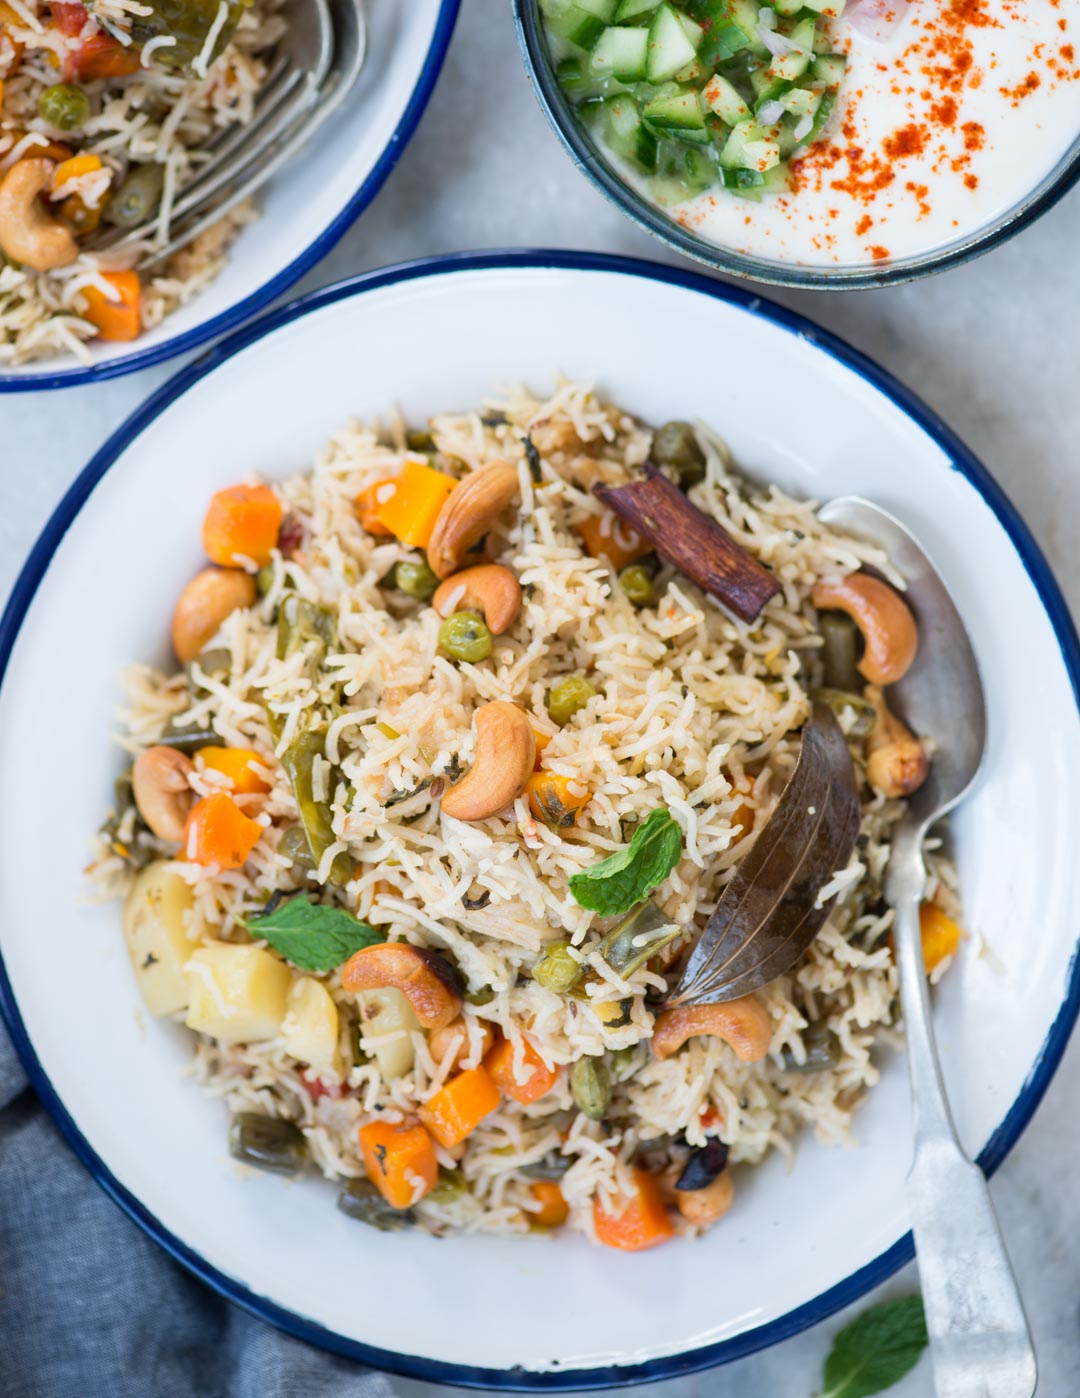 Veg Pulao with cashews, vegetables and whole spices in a white plate and spoon.